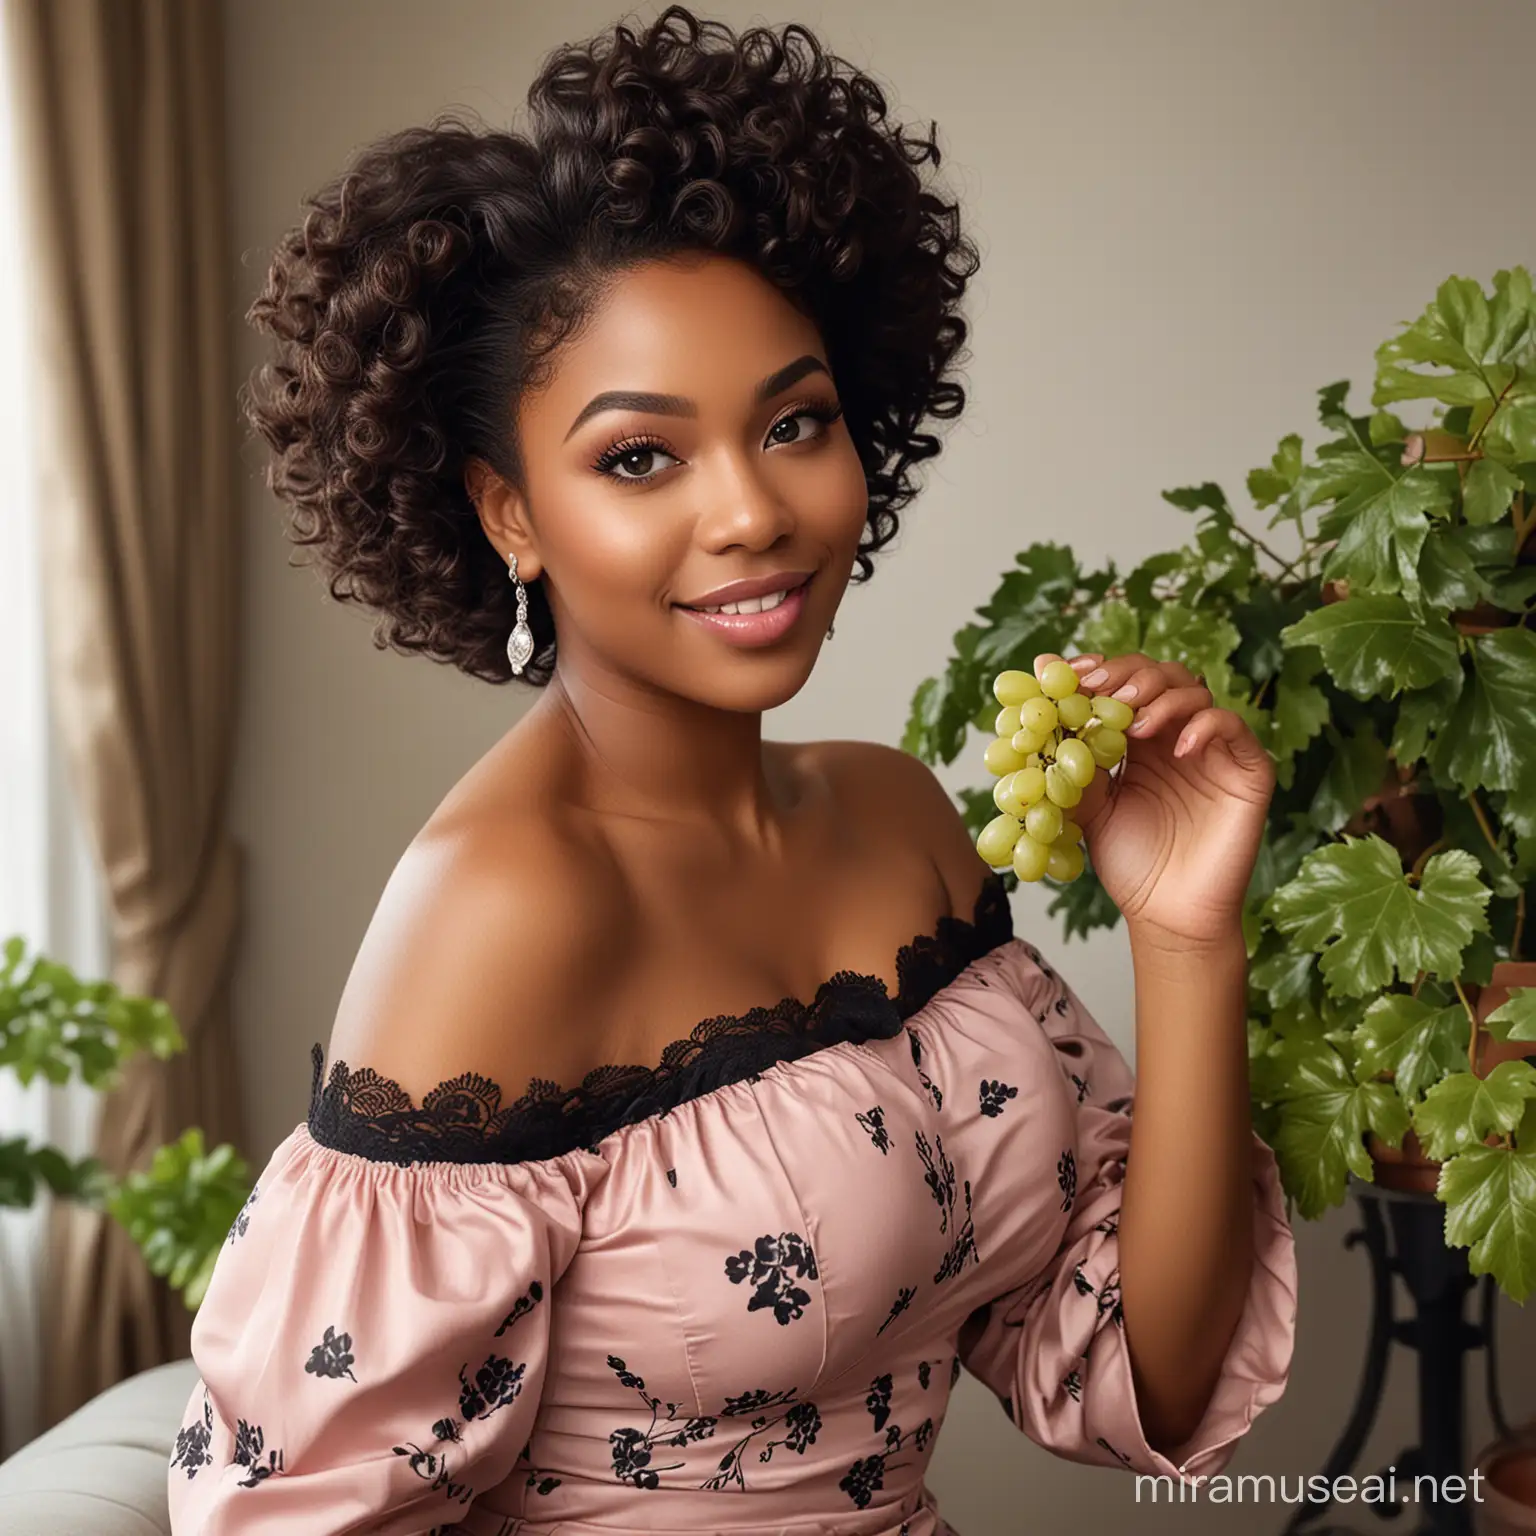 Confident AfroAmerican Woman with Grapes in OffShoulder Dress